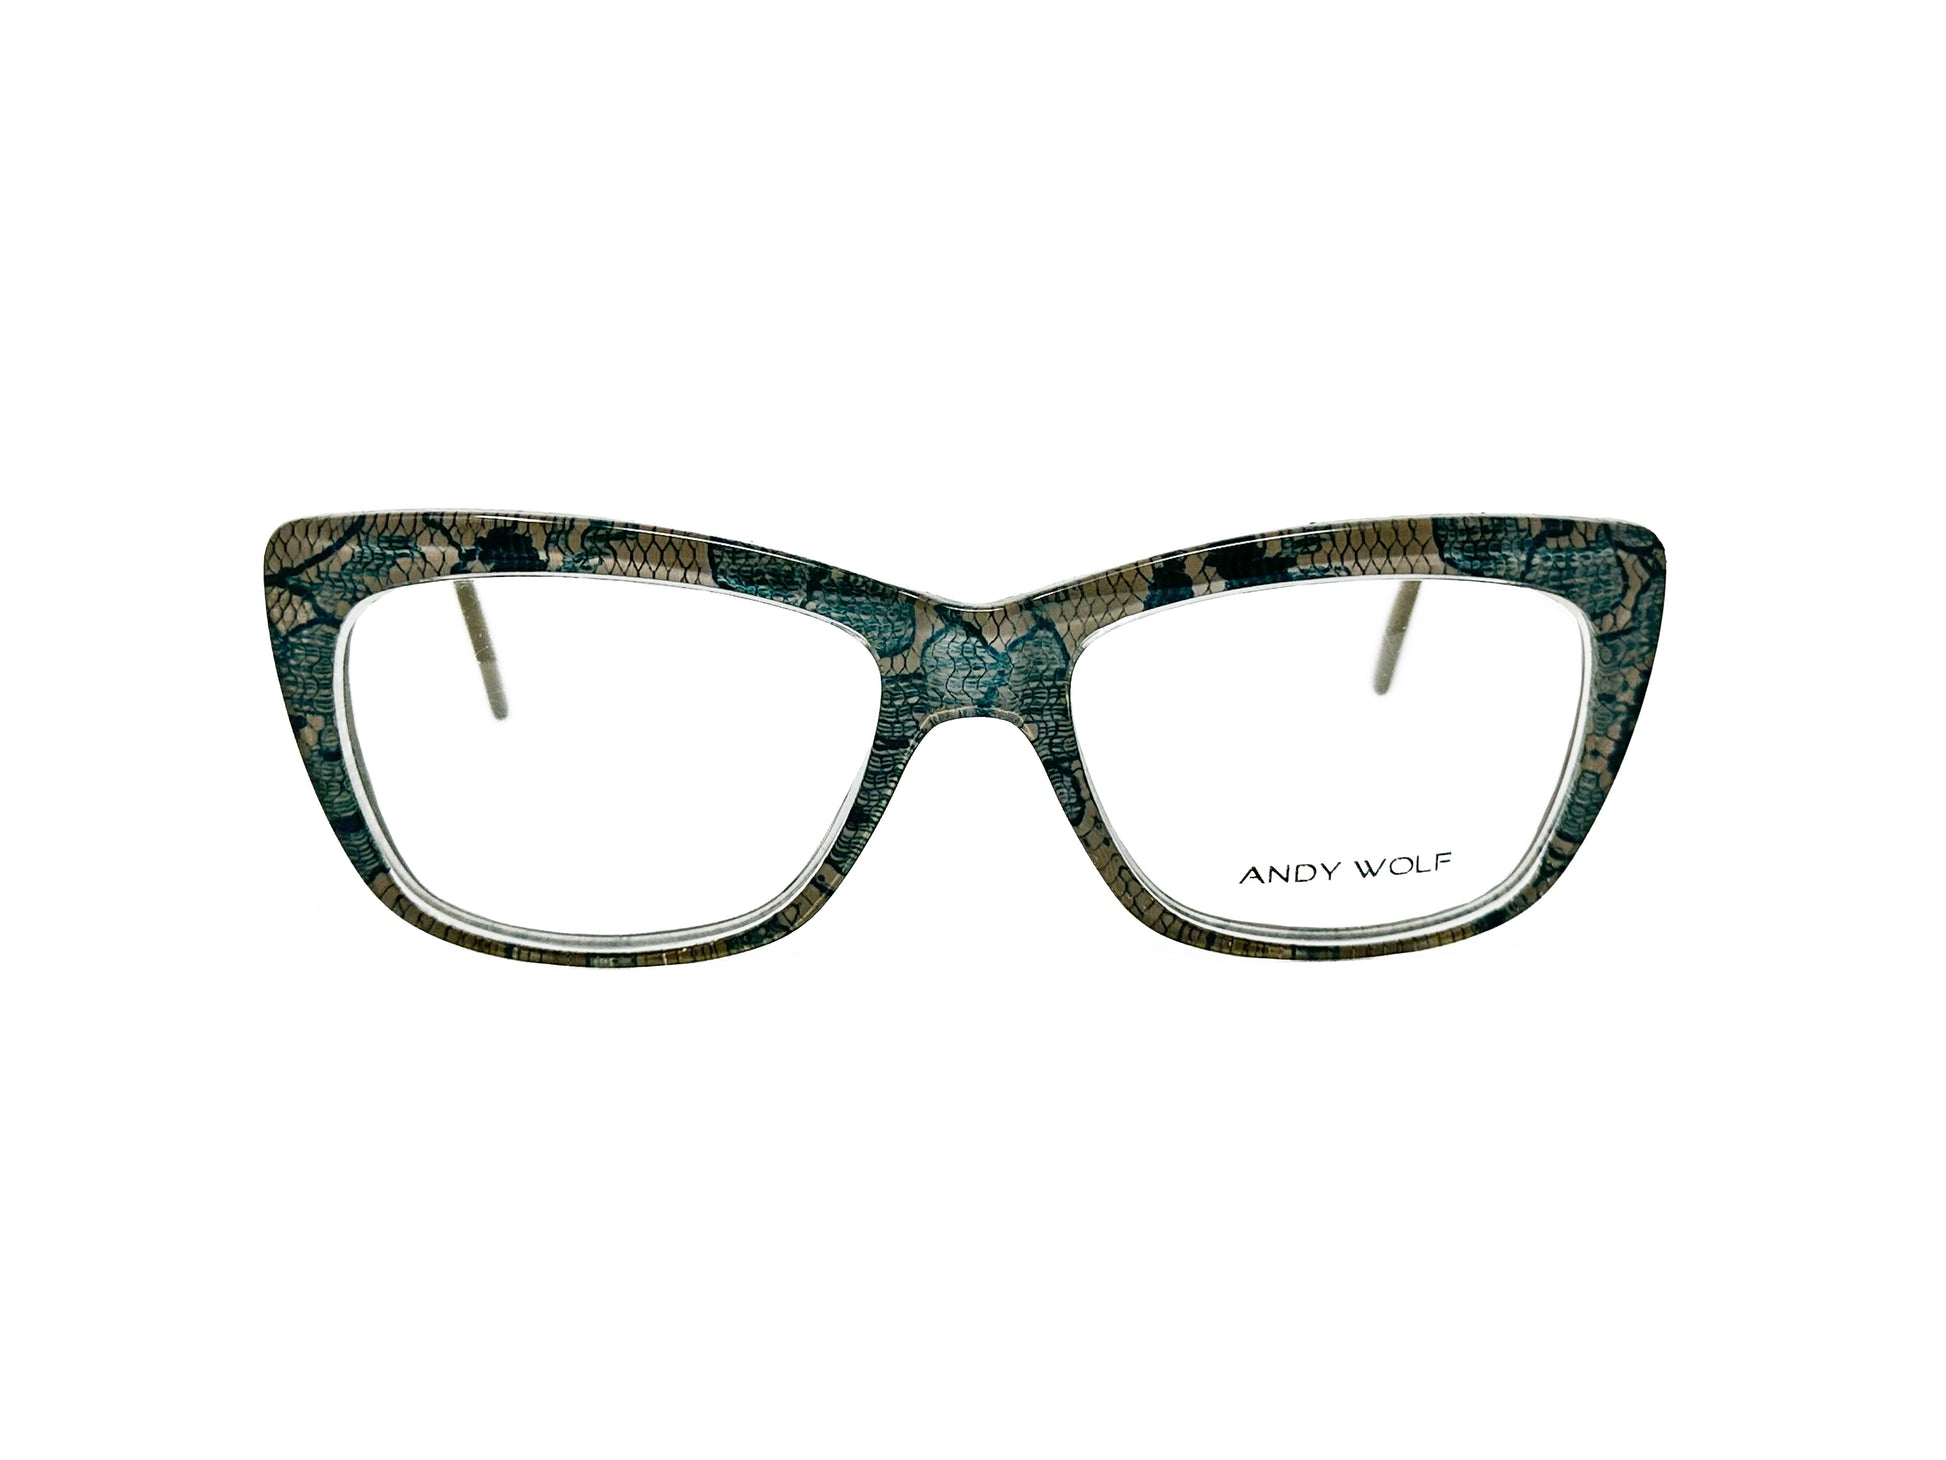 Andy Wolfe acetate, rectangular, cat-eye optical frame. Model: 5017. Color: D- Dark green and olive with black snake skin pattern. Front view.